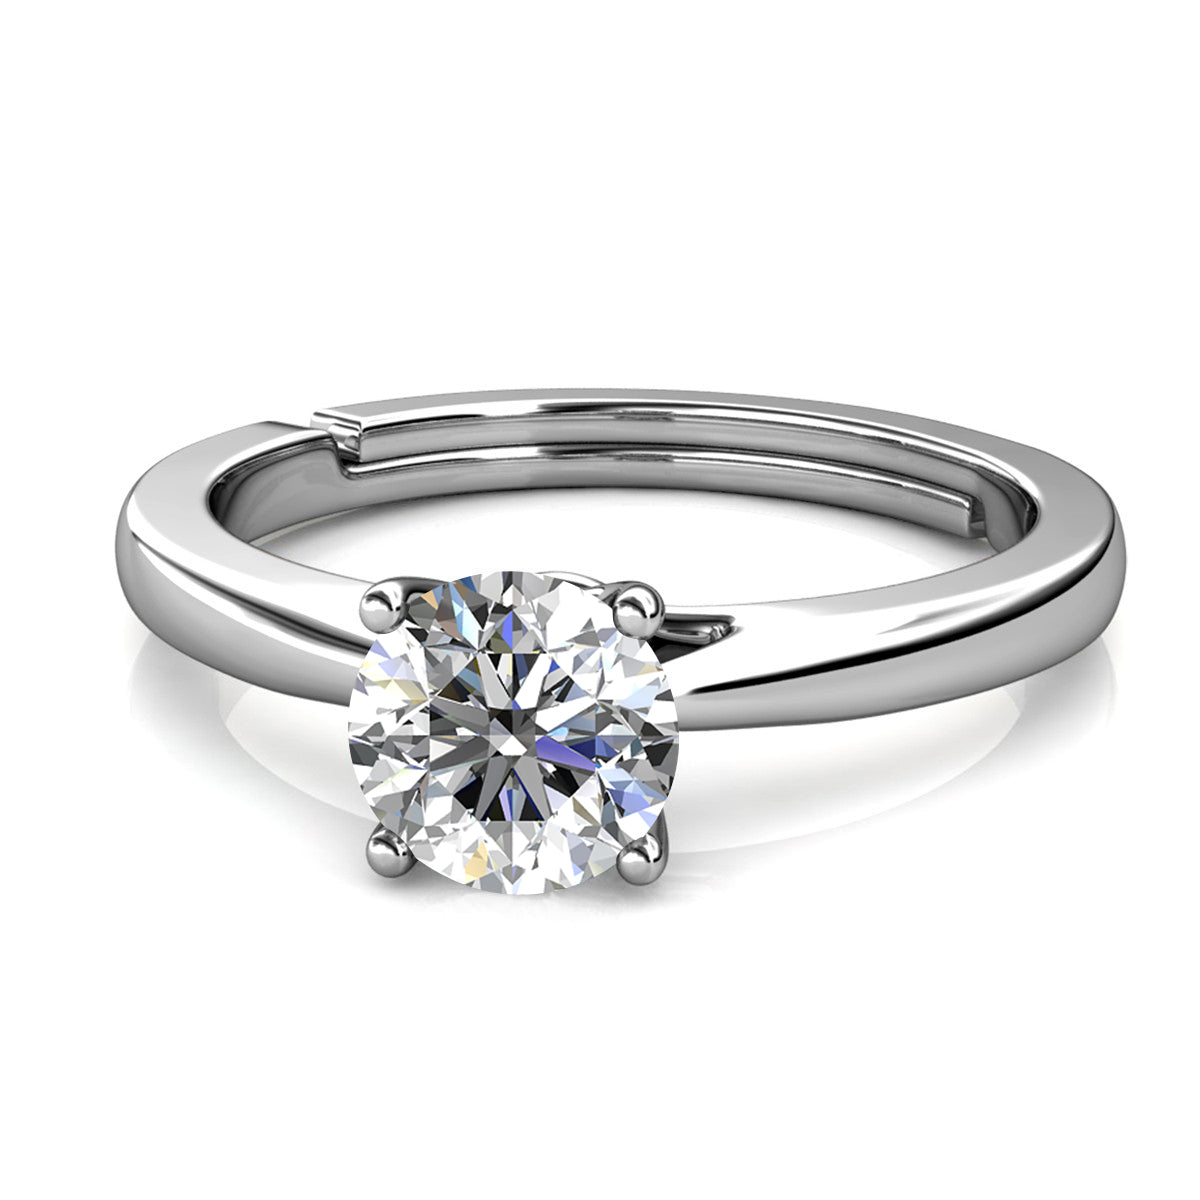 Moissanite by Cate & Chloe Abigail Sterling Silver Ring with Moissanite Crystals